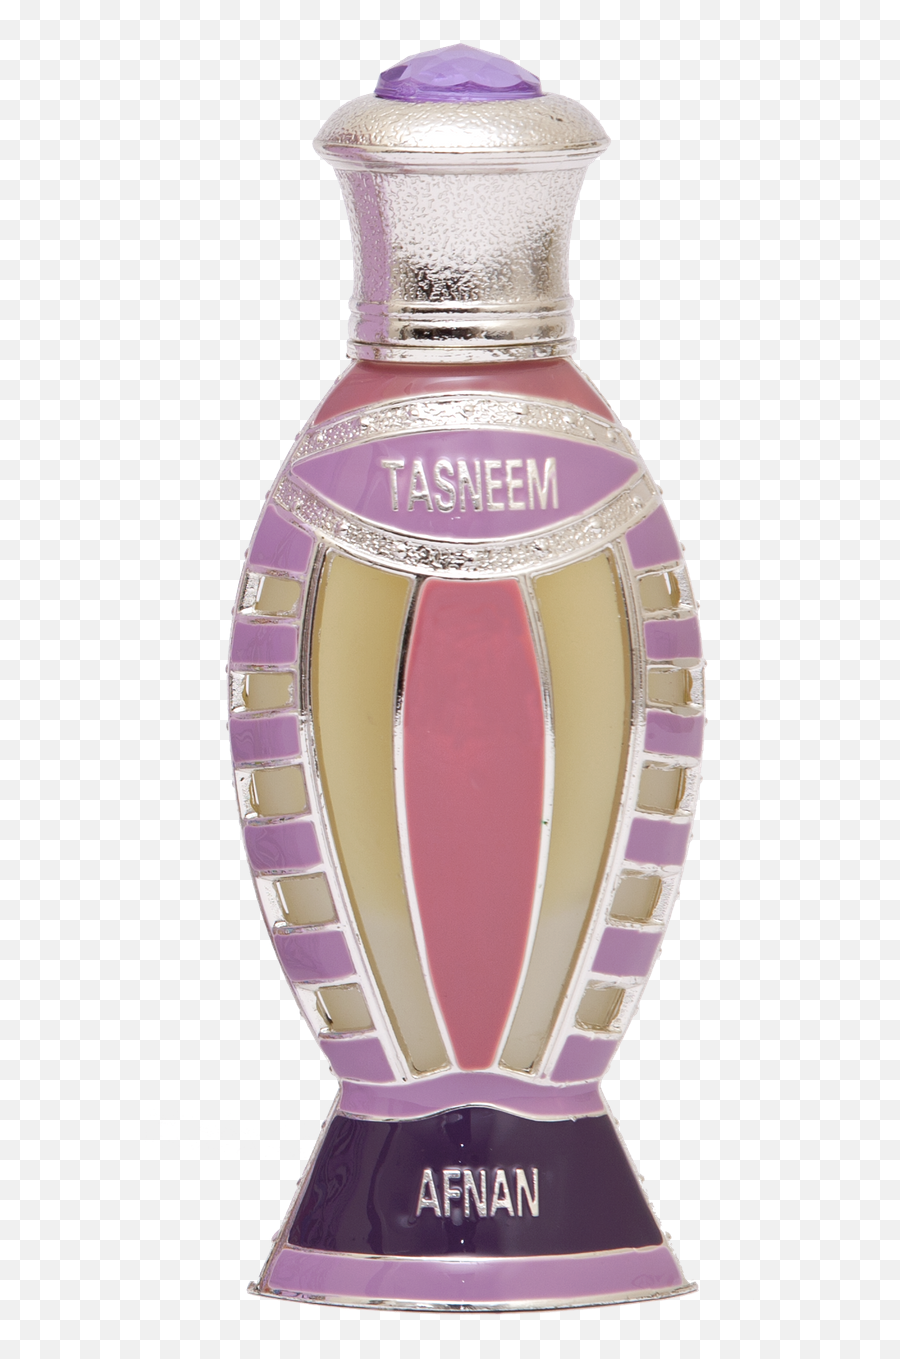 Buy Afnan - Tasneem Concentrated Perfume Oil For Women 20ml Online Shop Beauty U0026 Personal Care On Carrefour Uae Afnan Tasneem Perfume Emoji,??? Emotion Rasasi